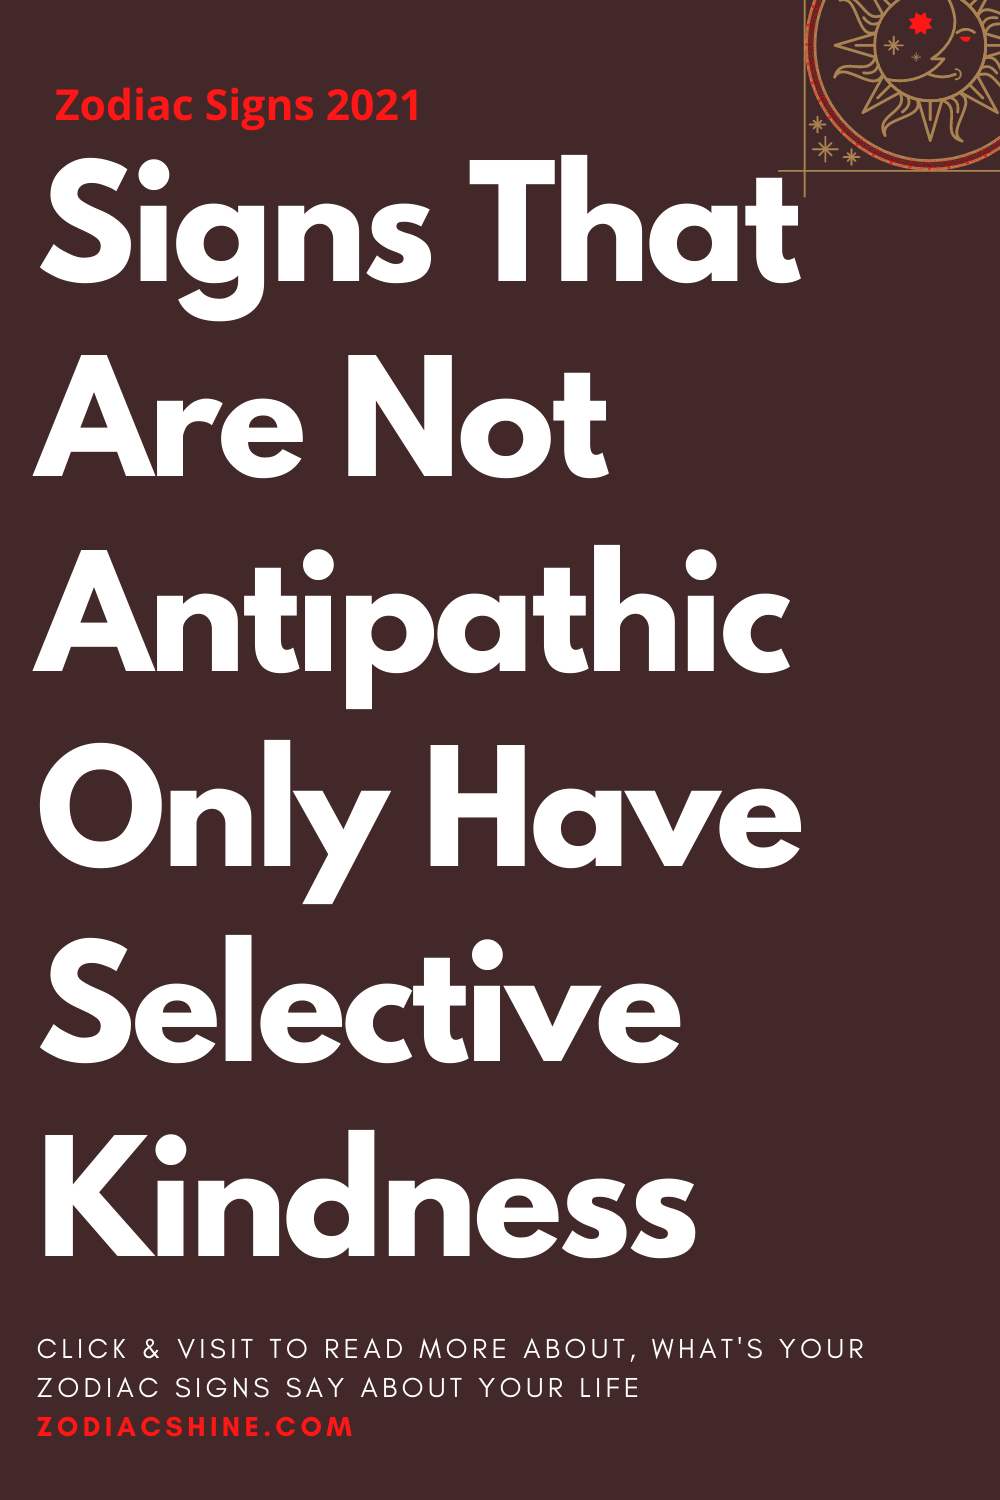 Signs That Are Not Antipathic Only Have Selective Kindness